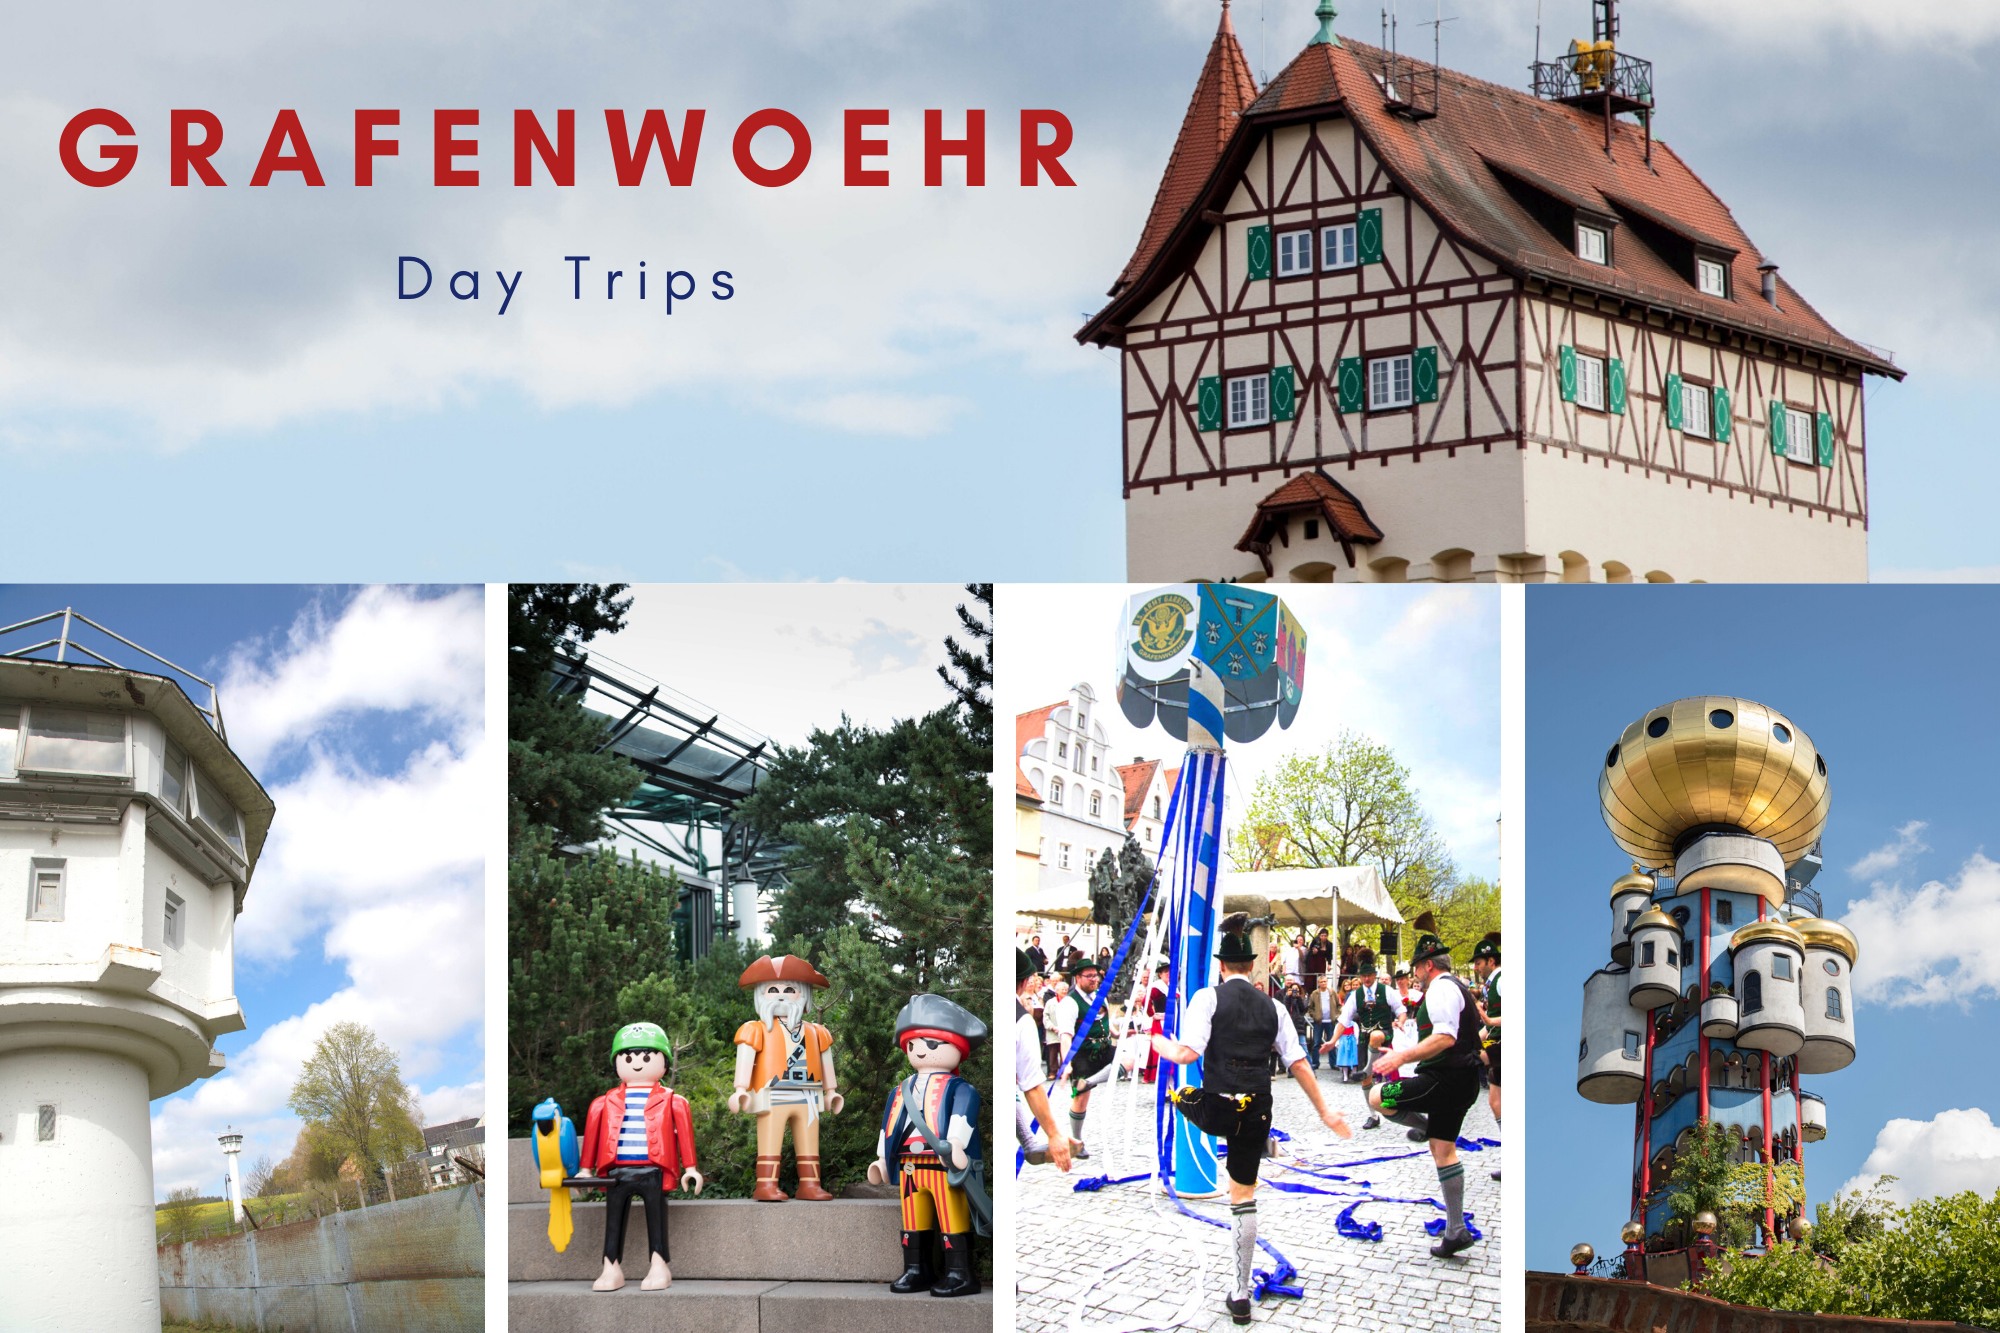 Multi-image: Graf Tower, Moedlareuth tower, Playmobil Funpark, Maypole dancing, and Kuchlbauer Tower.